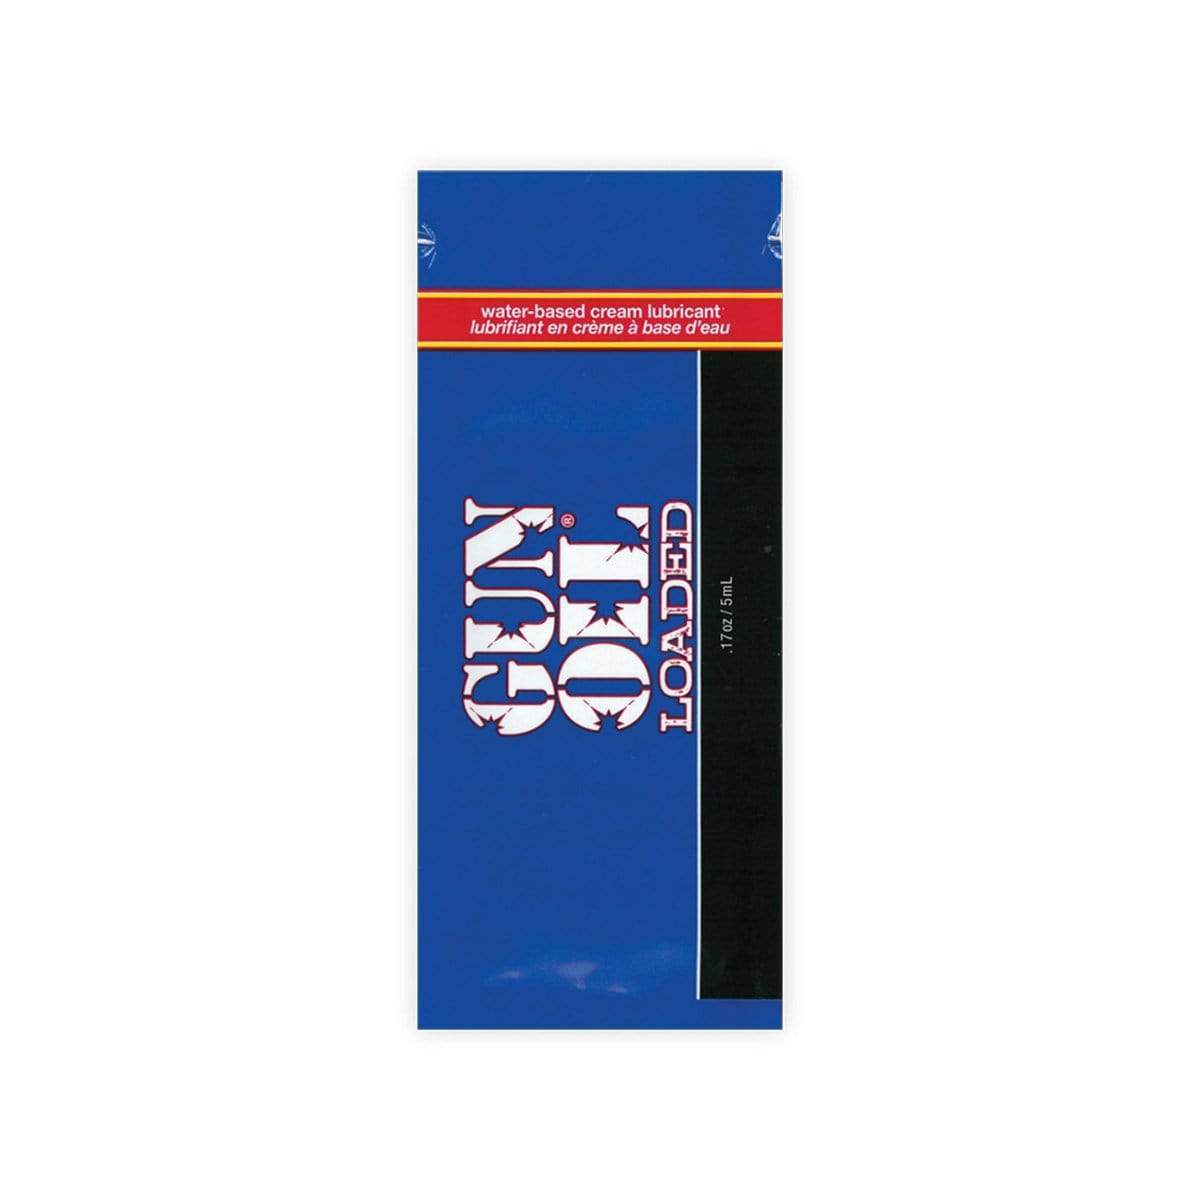 Gun Oil - Loaded Water Based Cream Lubricant 5ml -  Lube (Silicone Based)  Durio.sg